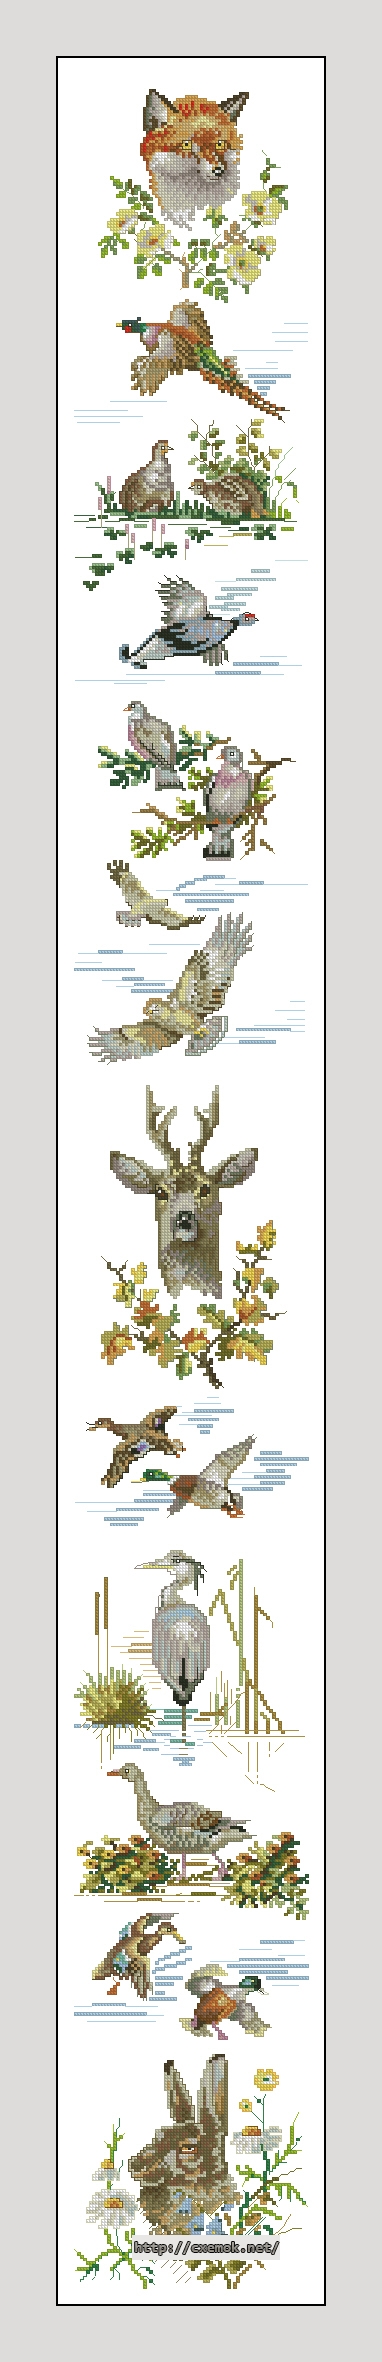 Download embroidery patterns by cross-stitch  - Hunting, author 